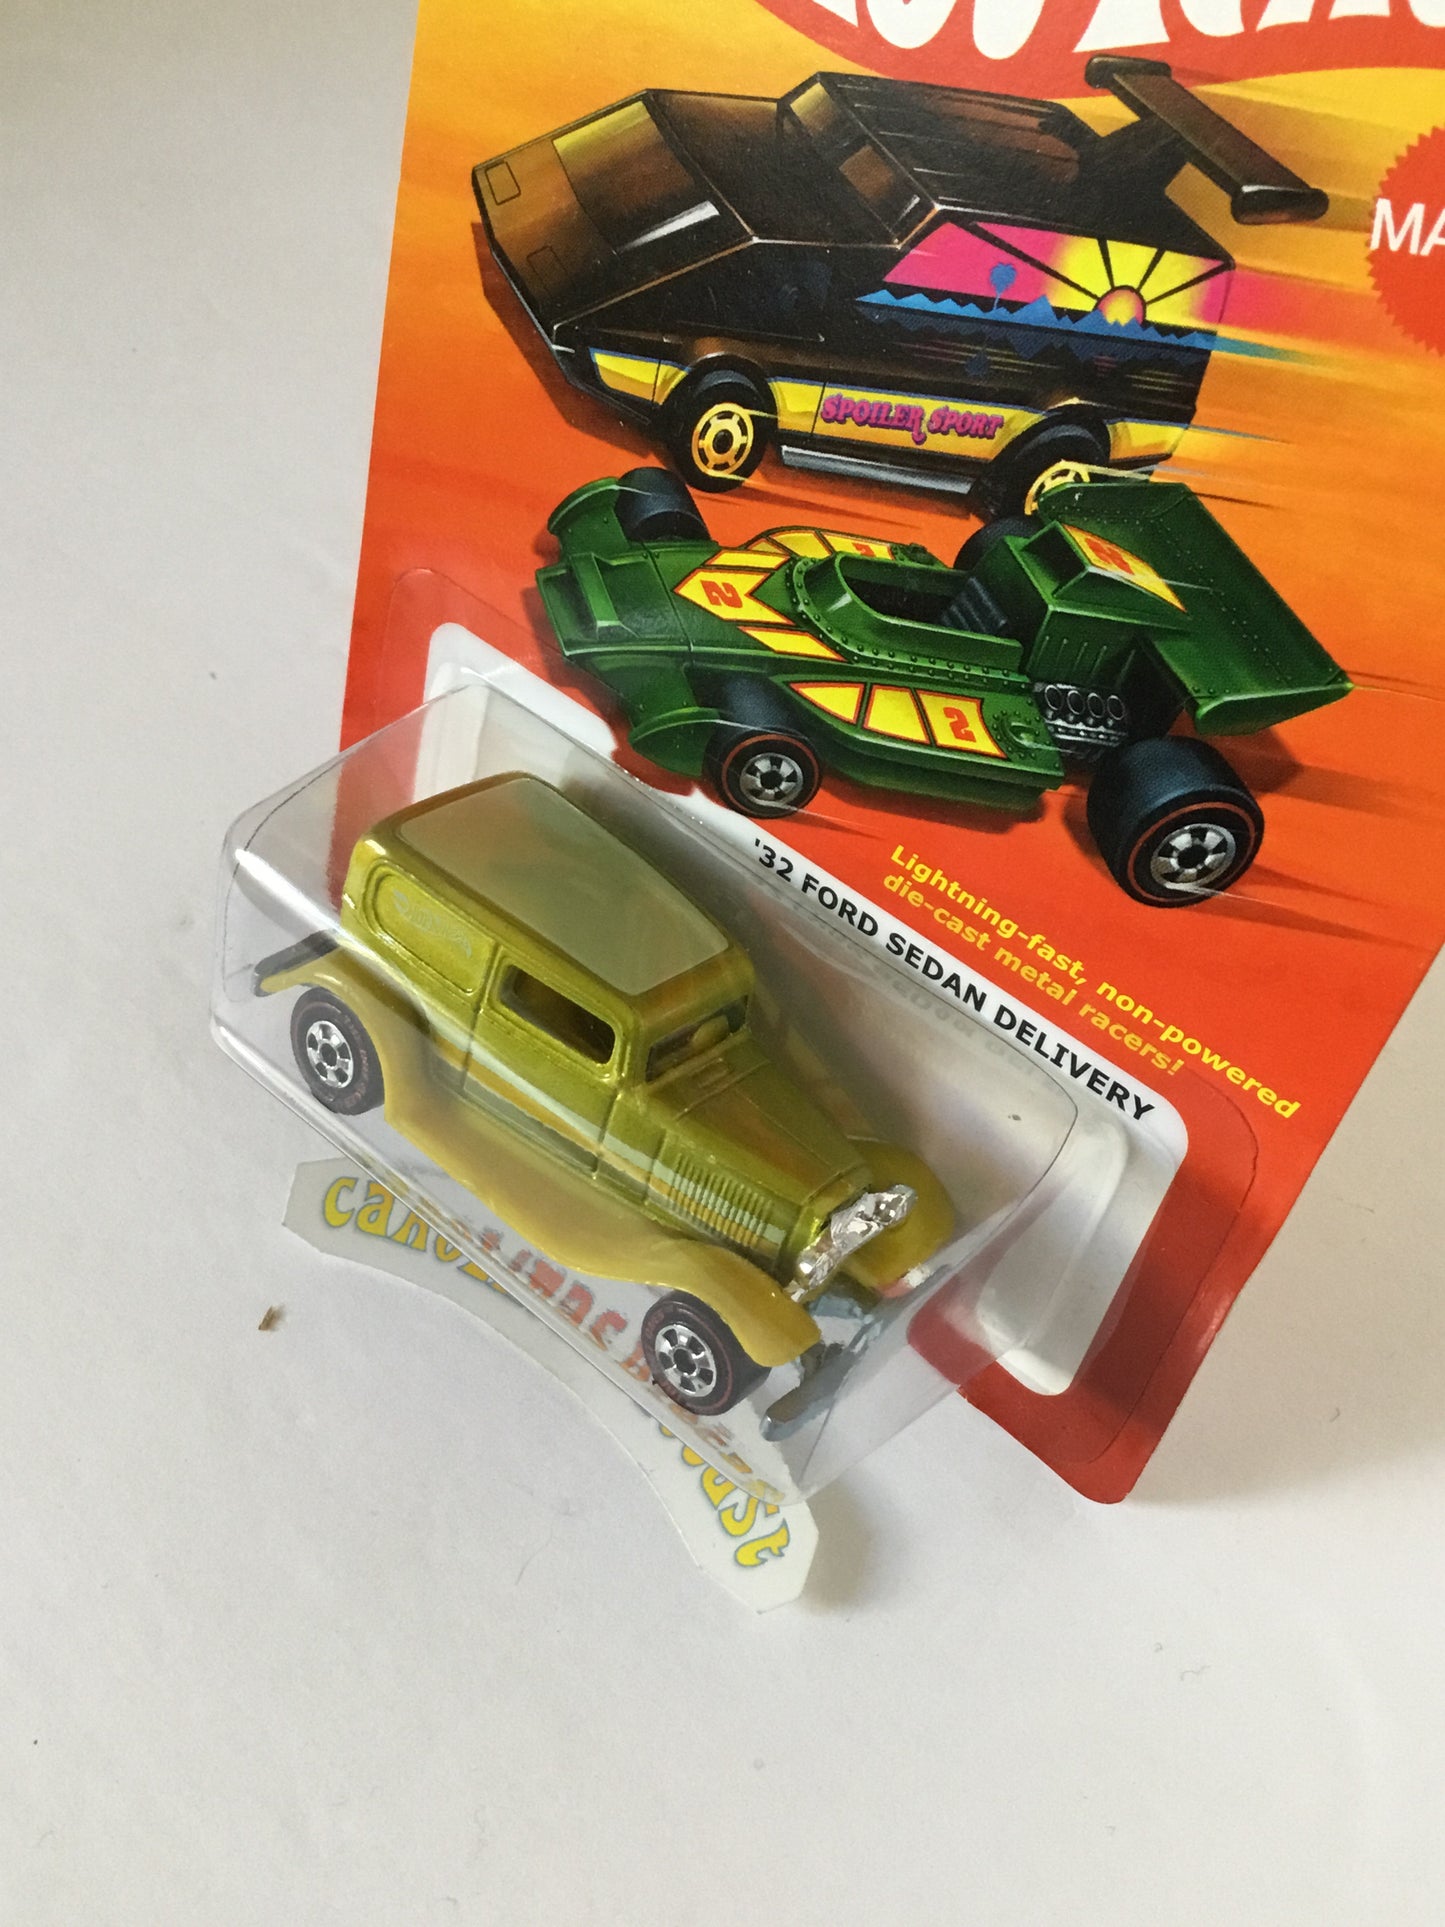 Hot wheels the hot ones CHASE 32 Ford Sedan Delivery Chase piece